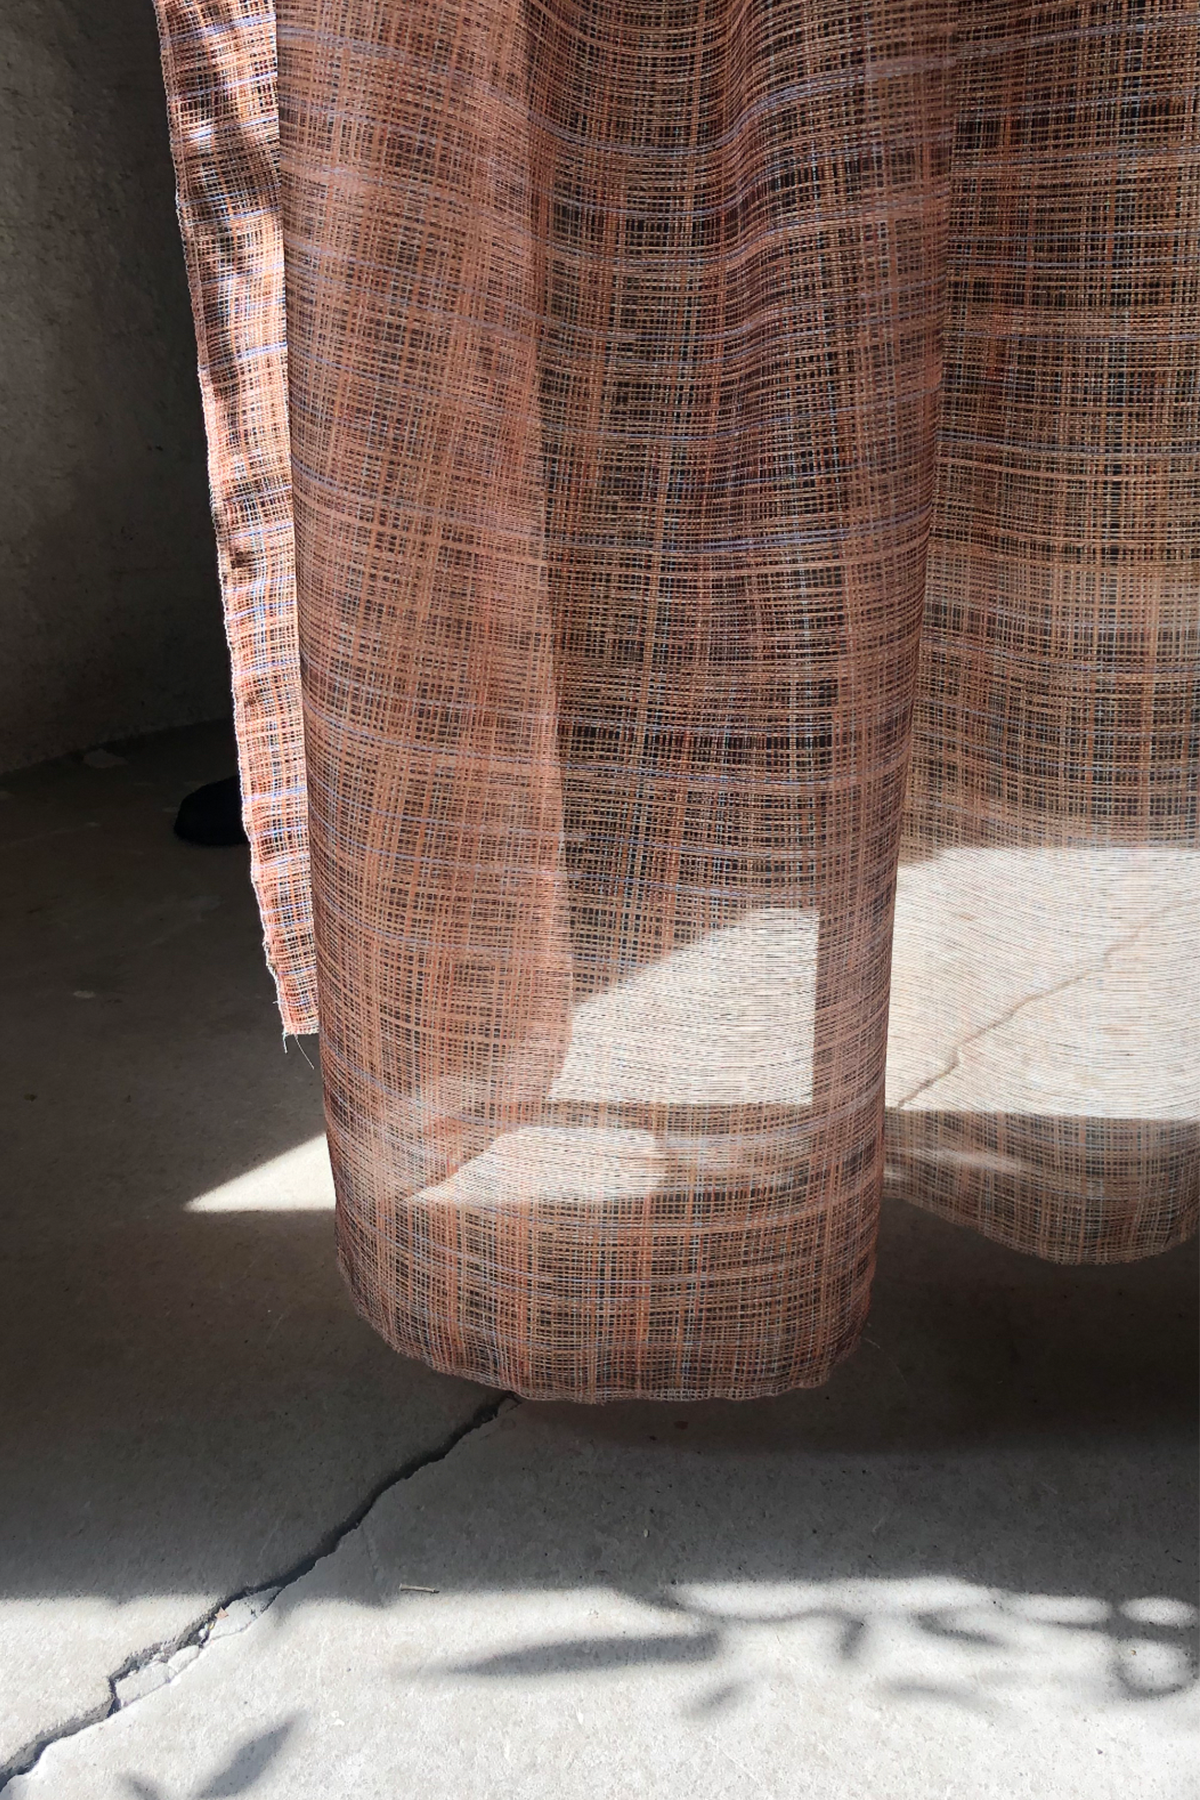 Ruta no 1 is manufactured in thinner curtain quality that is three meters wide, flameproof and meet the requirements for public environments. This transparent fabric has a structure that reinforces and enhances the pattern image and gives an exclusive feeling.